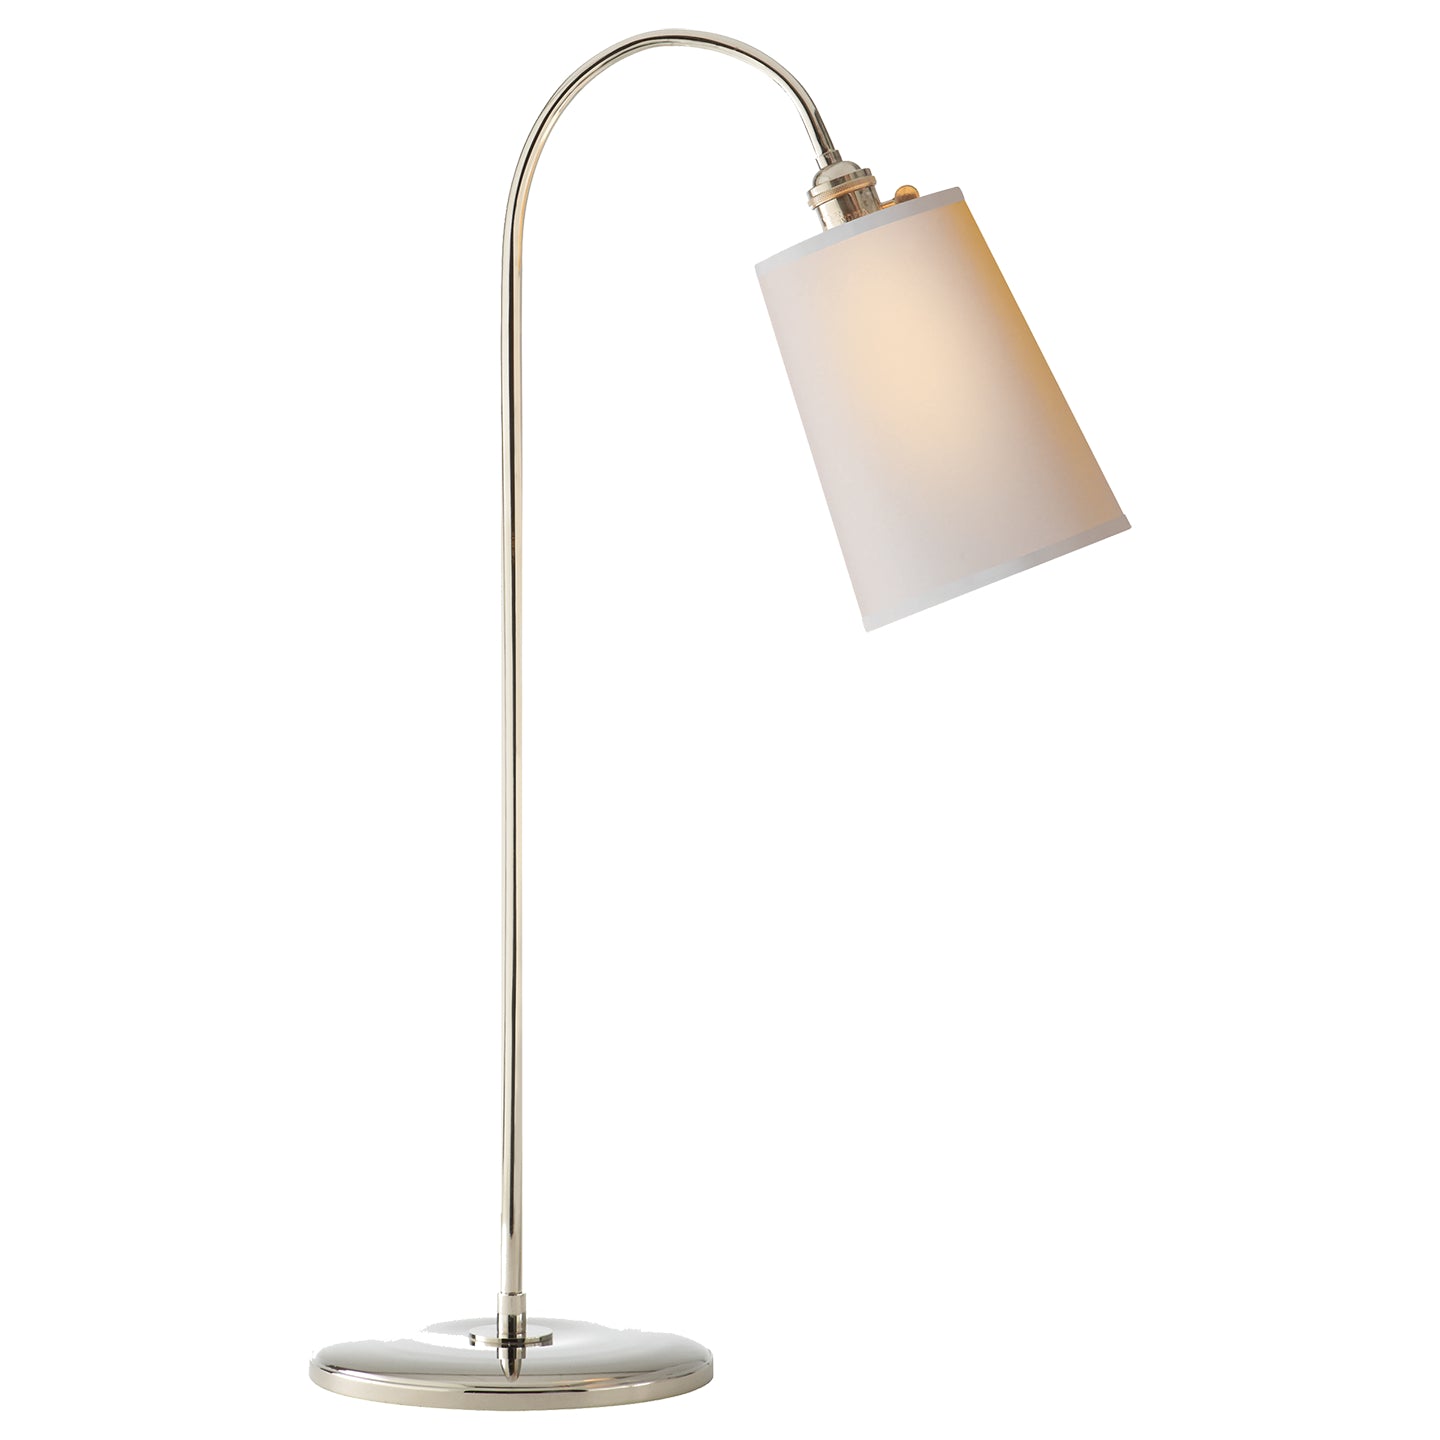 Load image into Gallery viewer, Visual Comfort Signature - TOB 3222PN-NP - One Light Table Lamp - Mia Lamp - Polished Nickel
